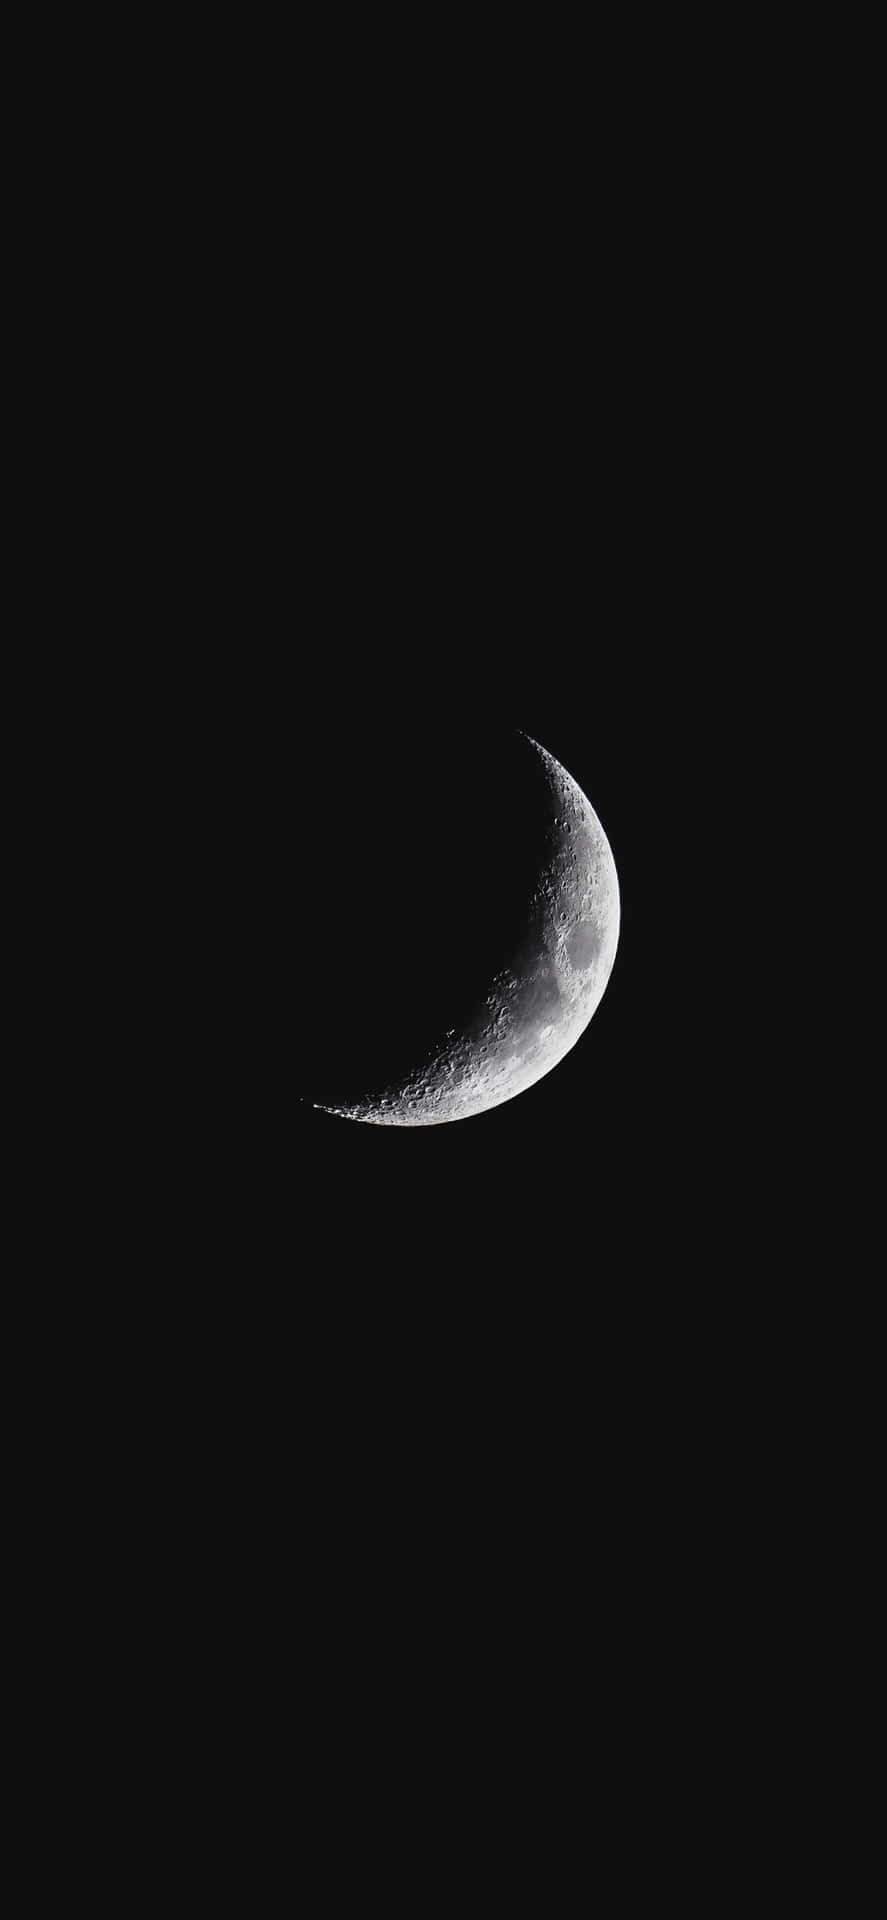 "Get the perfect look for your phone with this Moon iPhone wallpaper" Wallpaper